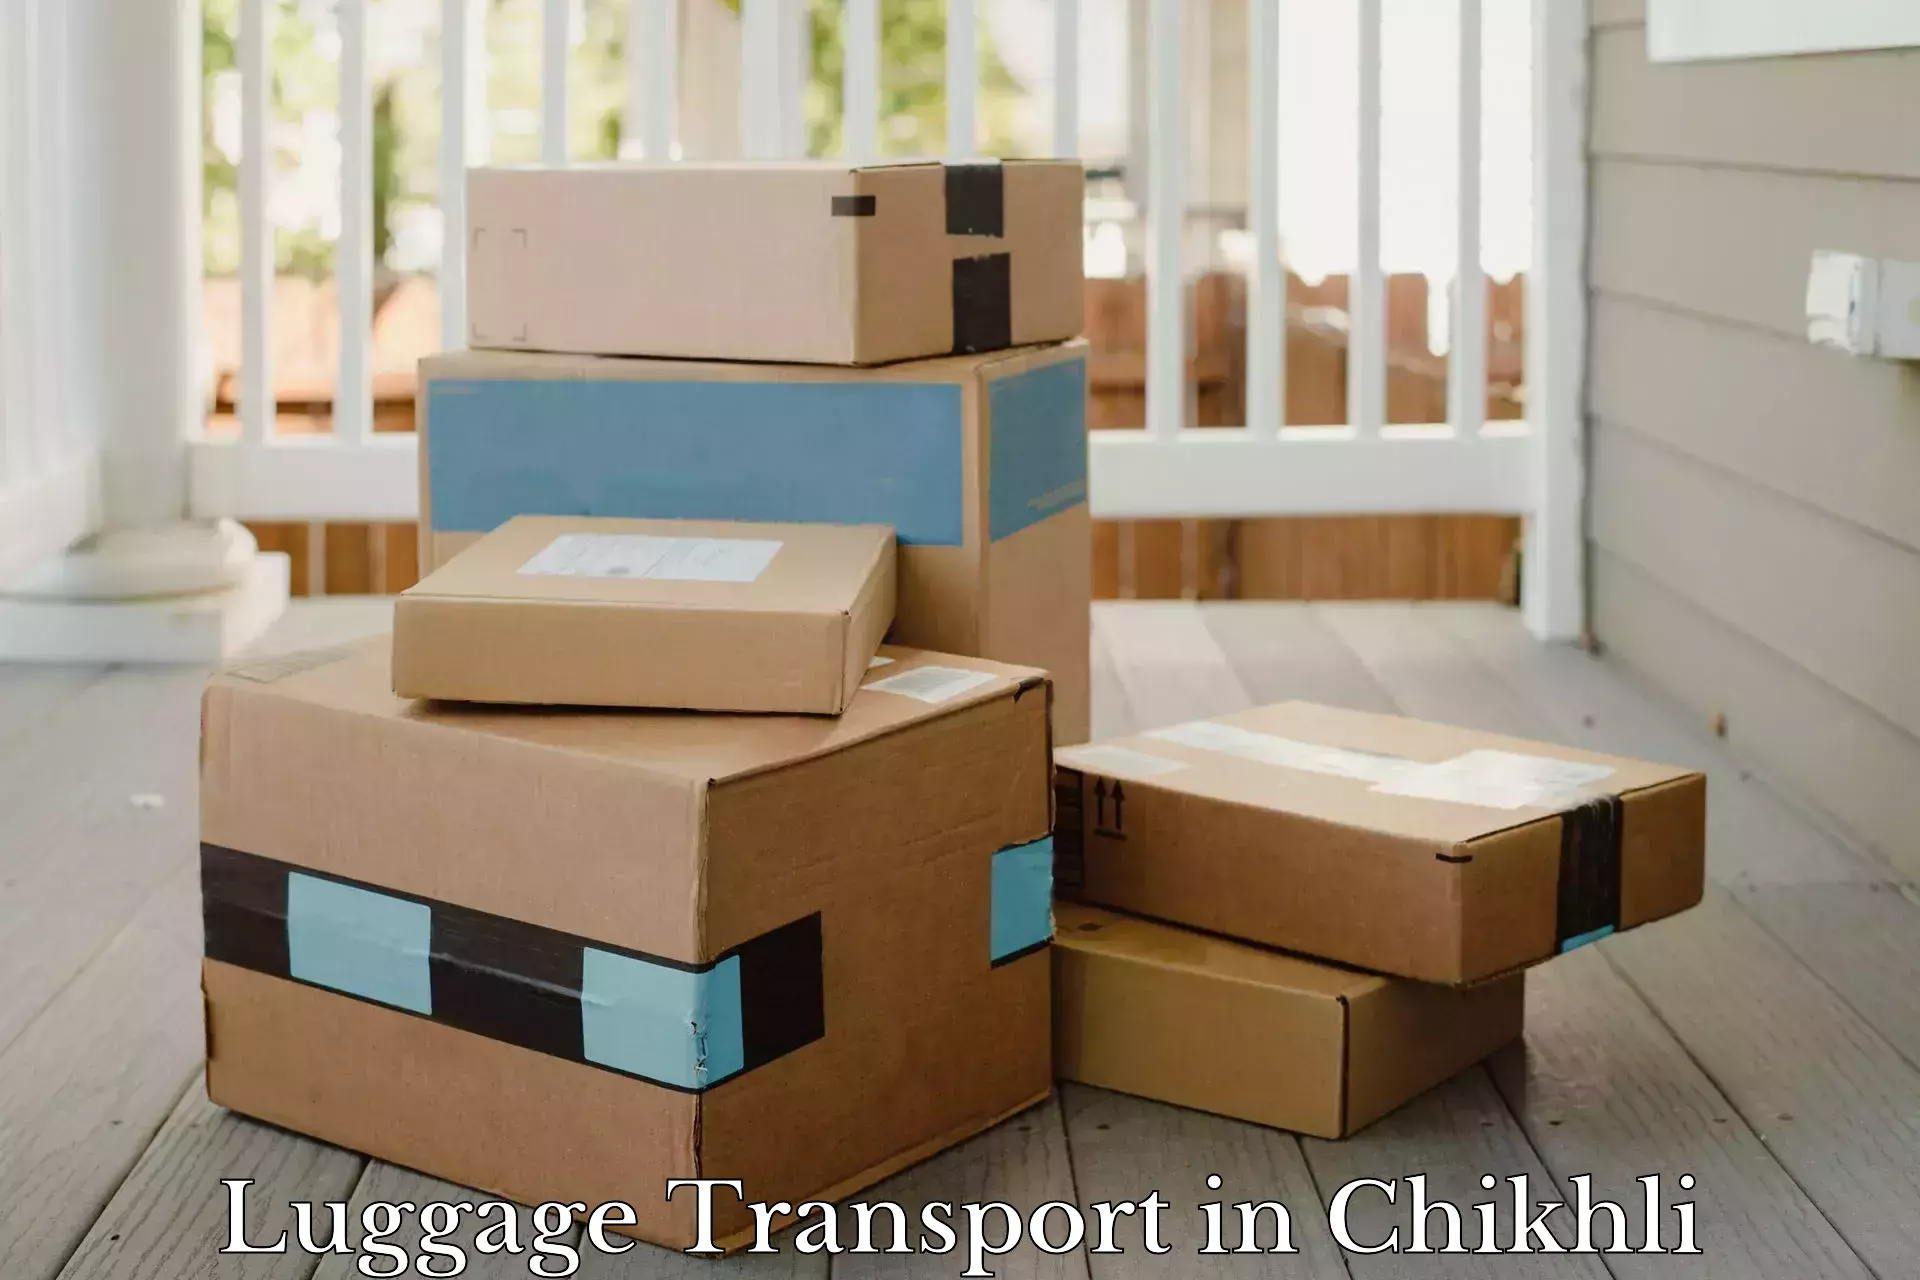 Baggage shipping service in Chikhli